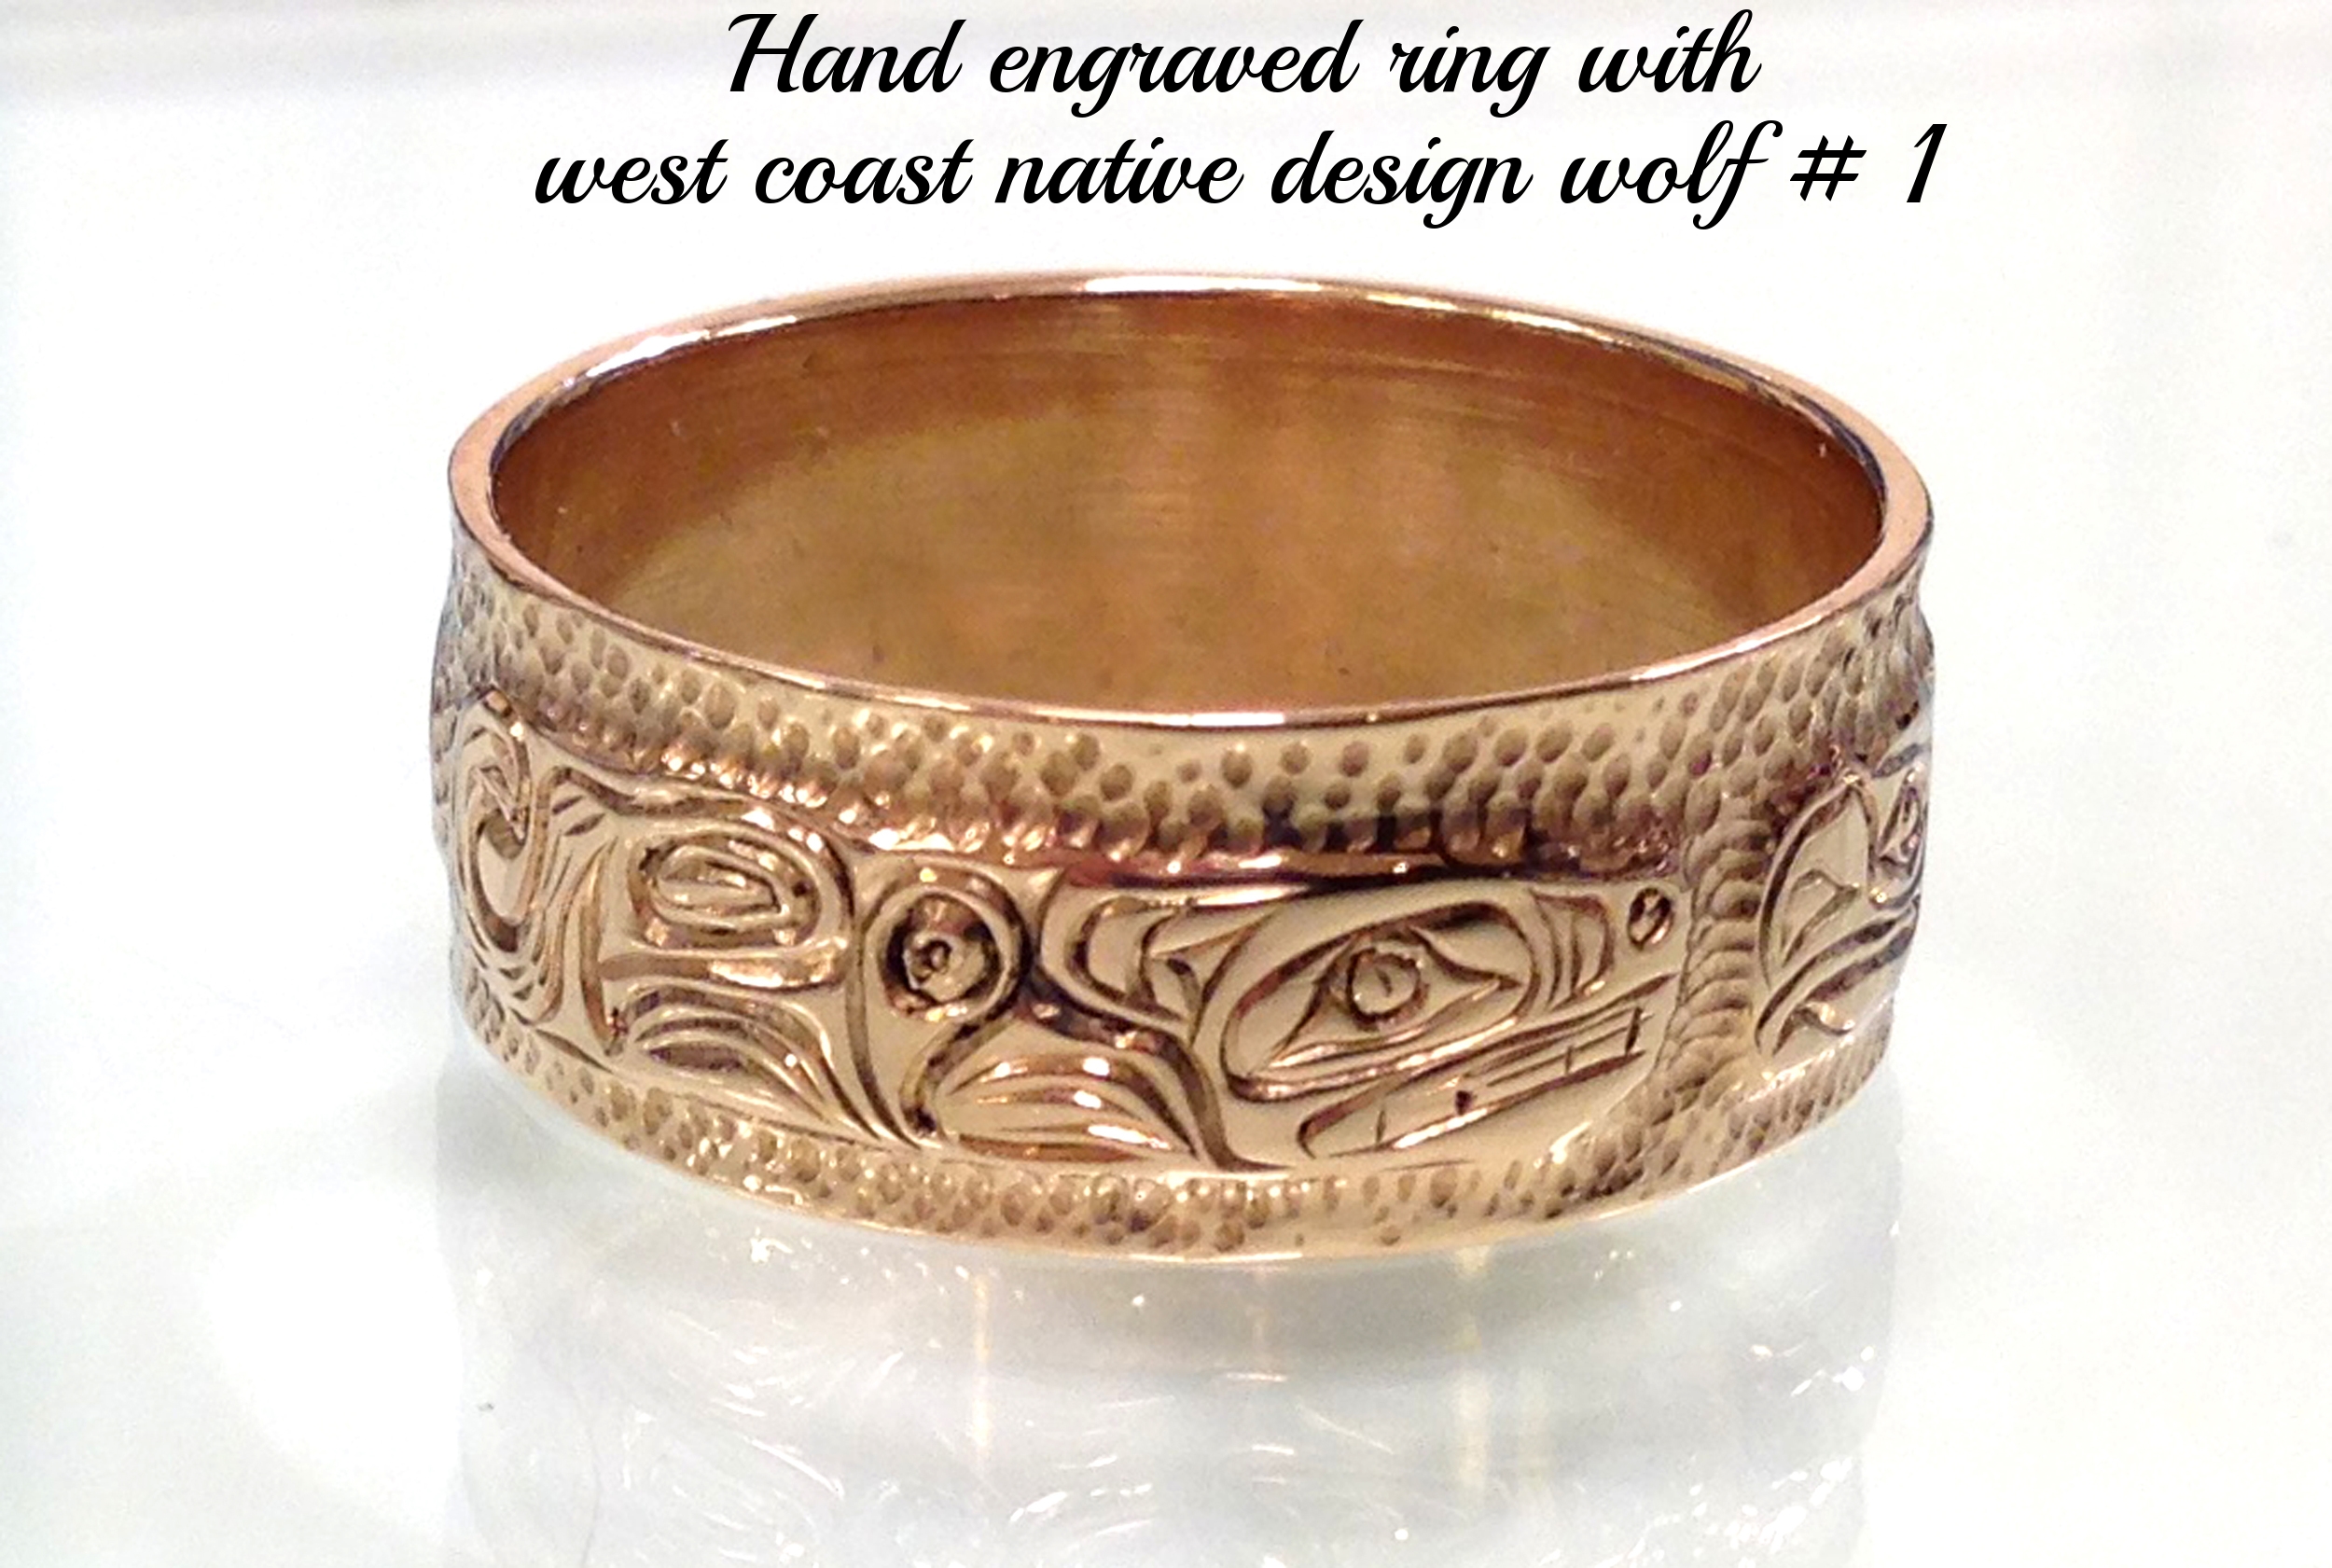 Hand engraved ring